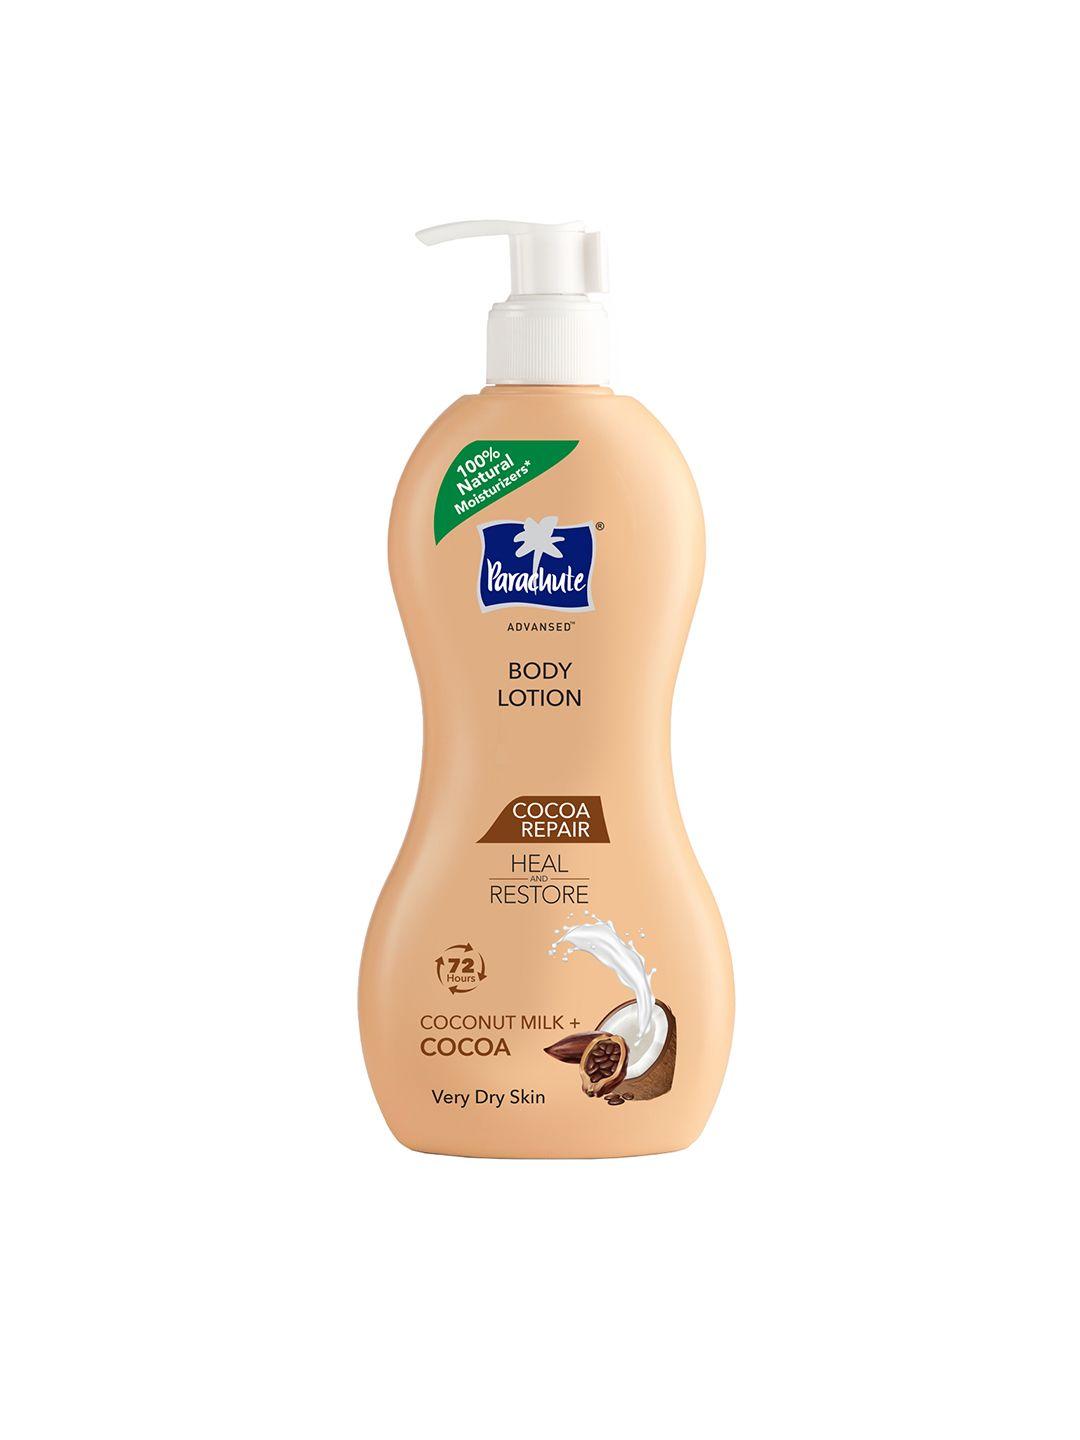 parachute advansed cocoa repair intense moisture body lotion for very dry skin 400 ml